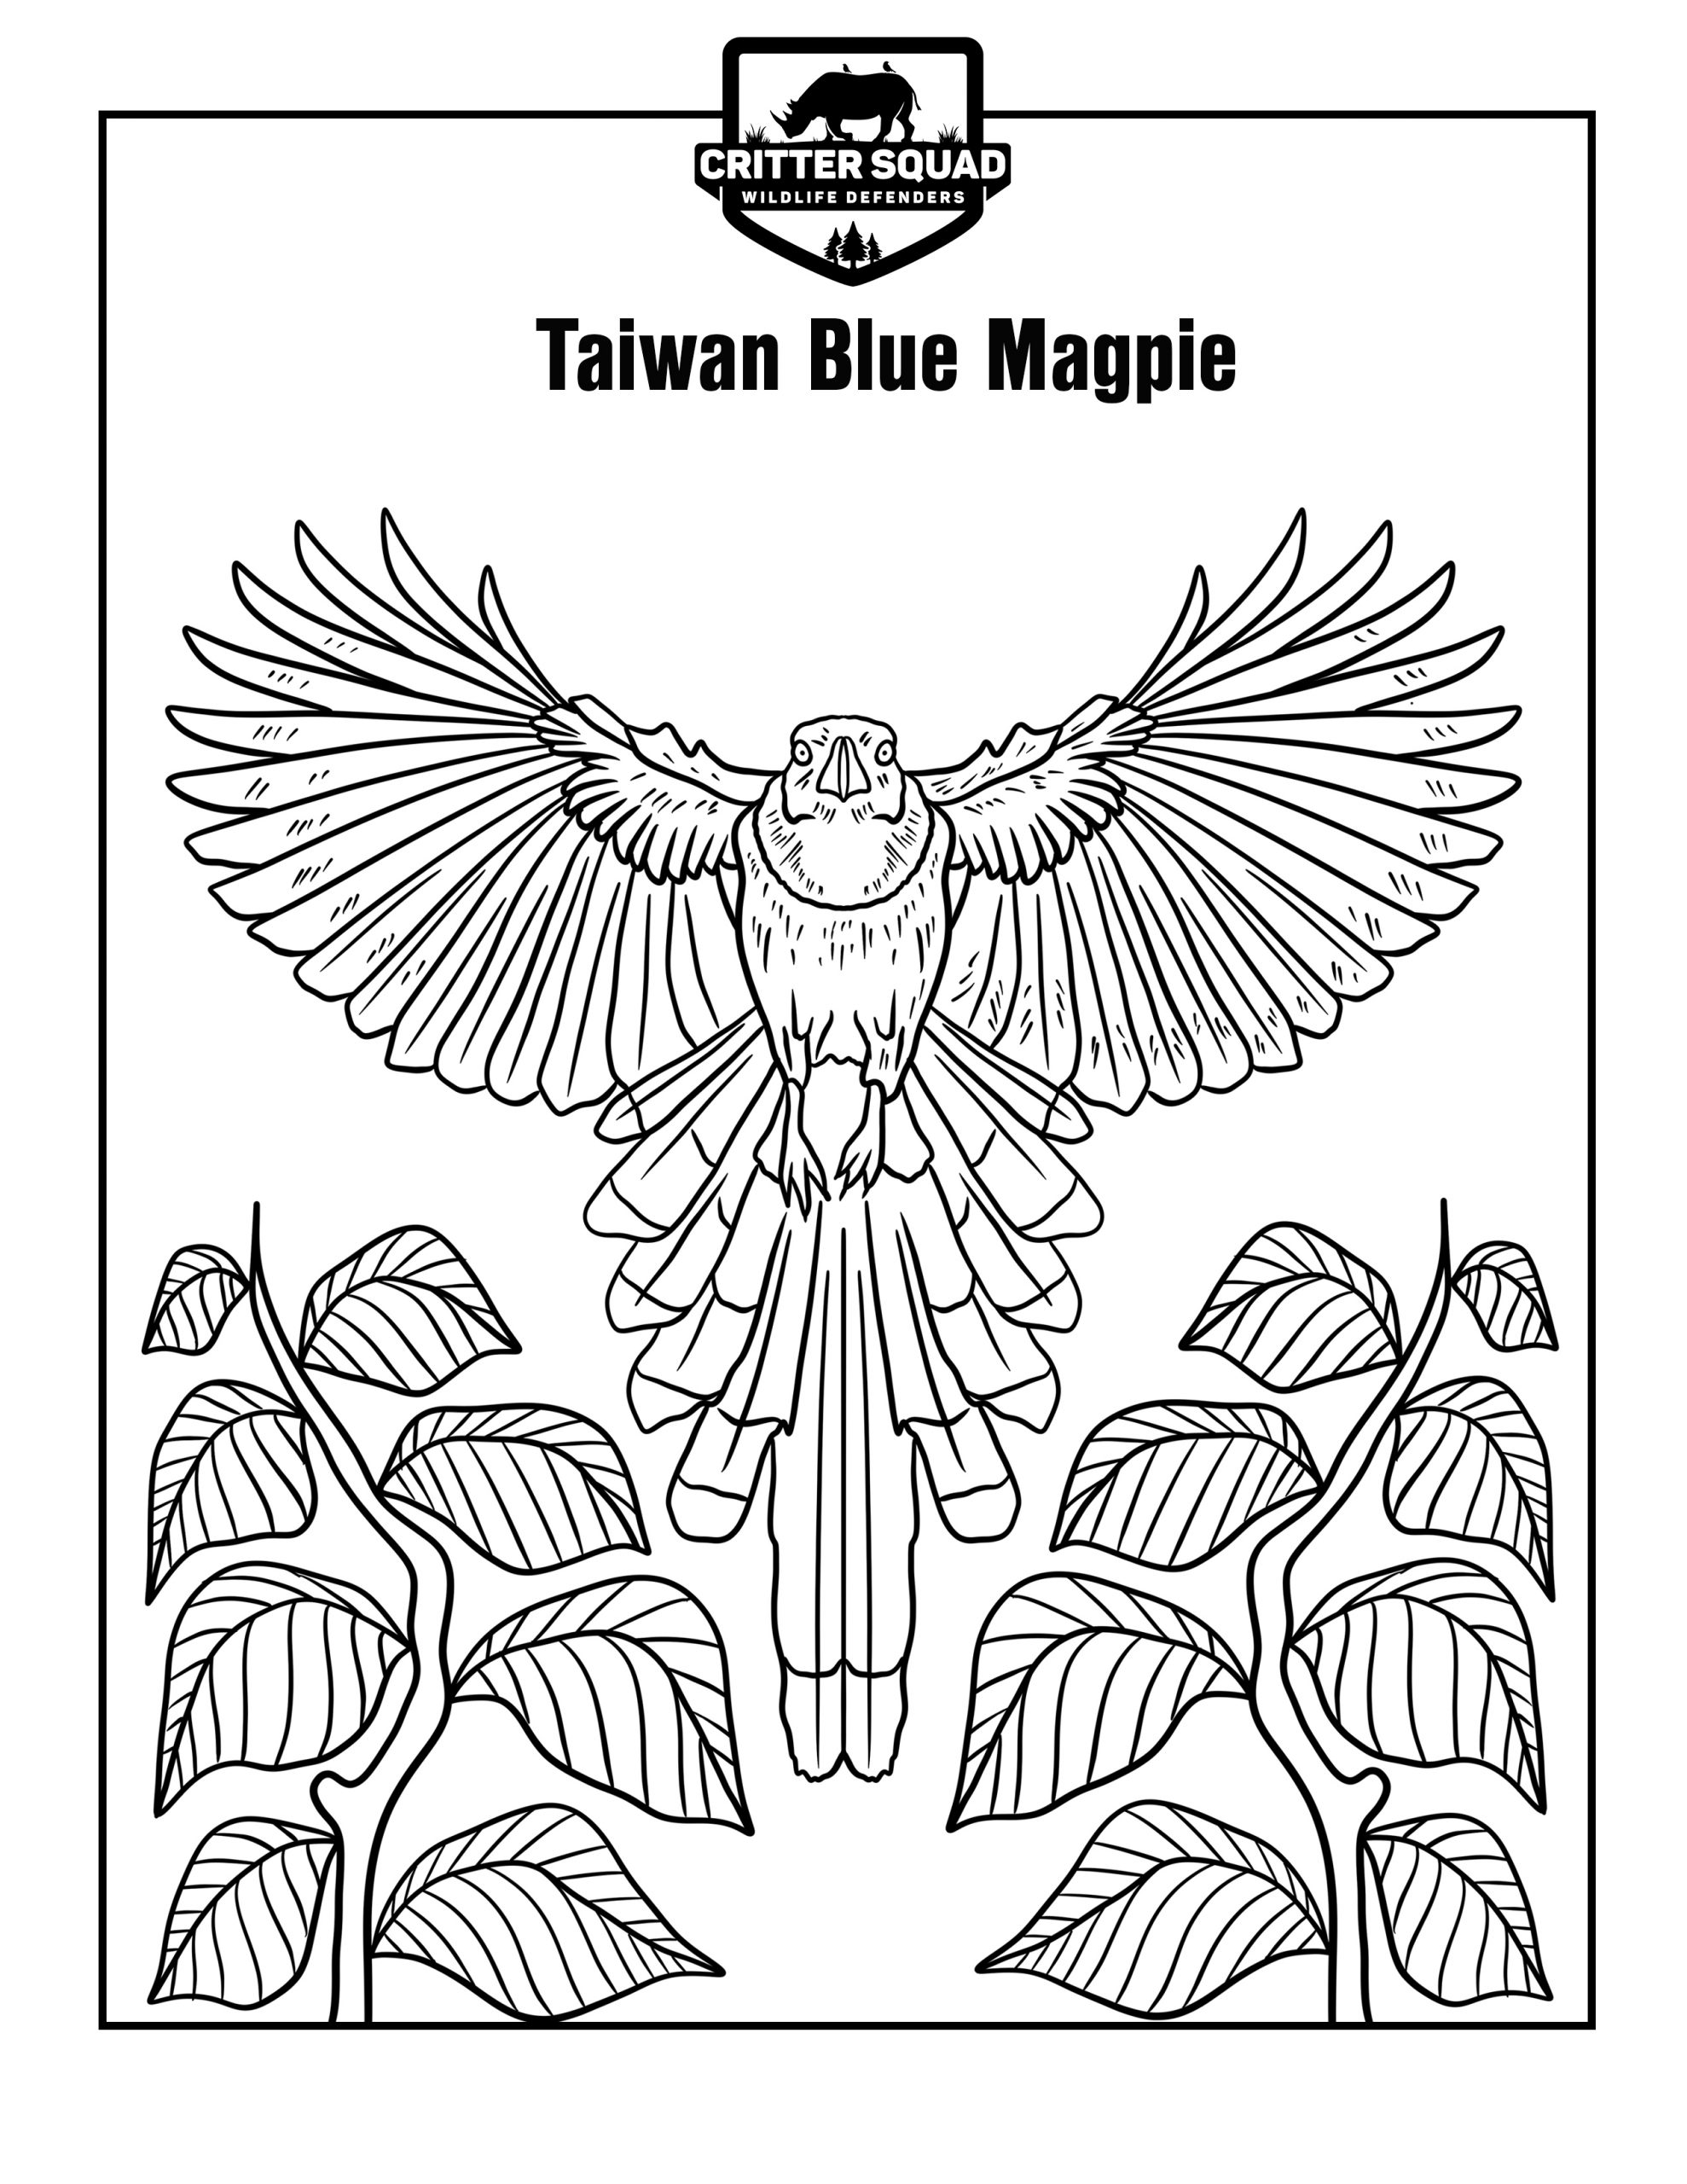 Taiwan Blue Magpie Coloring Page - C.S.W.D